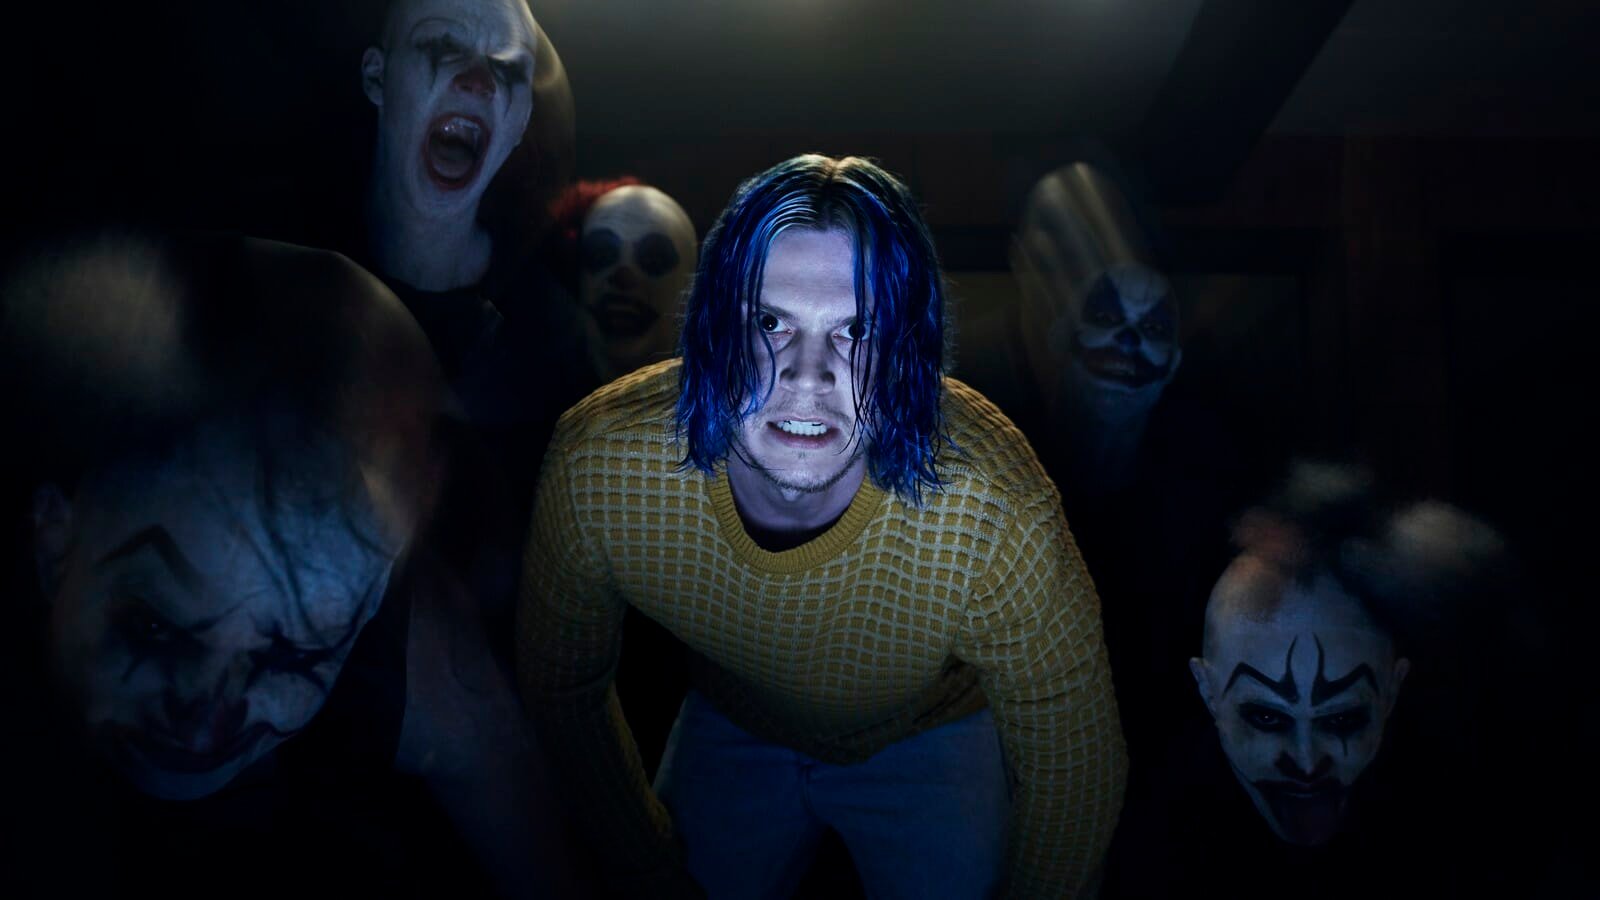 American Horror Story Season 11: Will Have How Many Episodes?